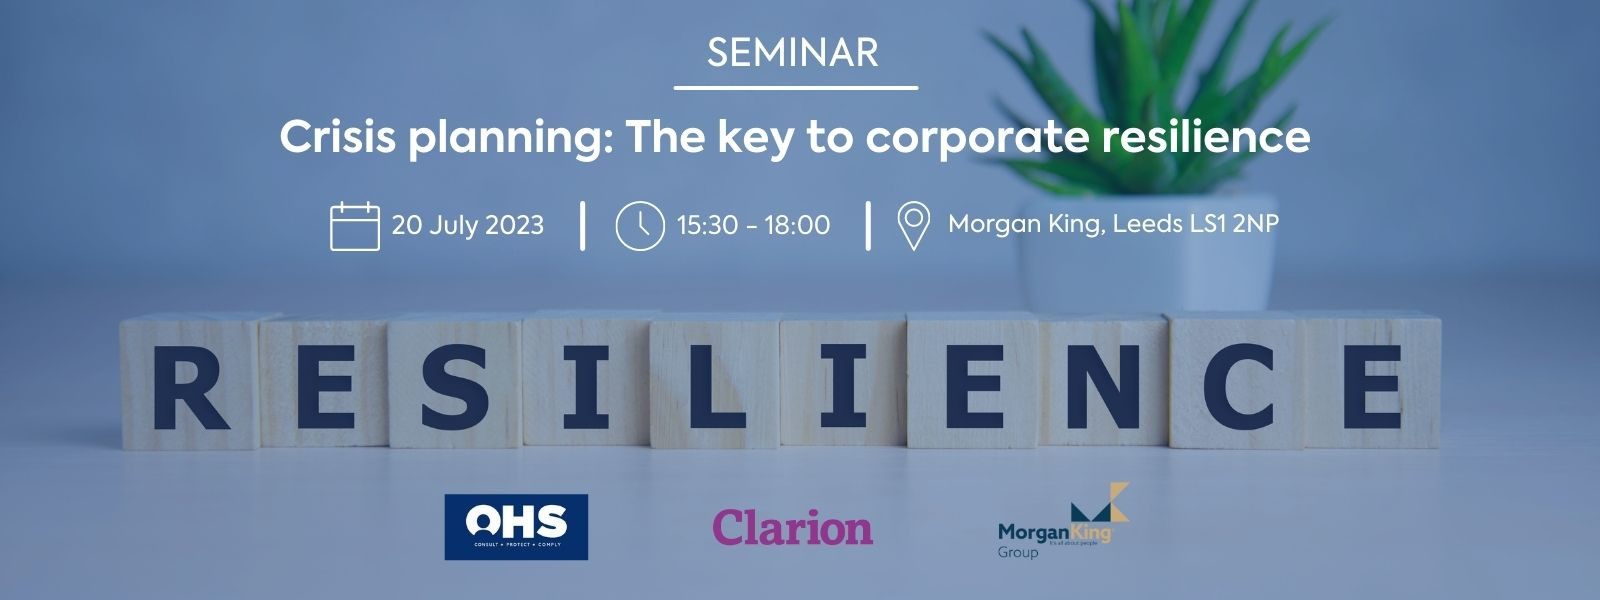 Seminar: Crisis Planning - The key to corporate resilience